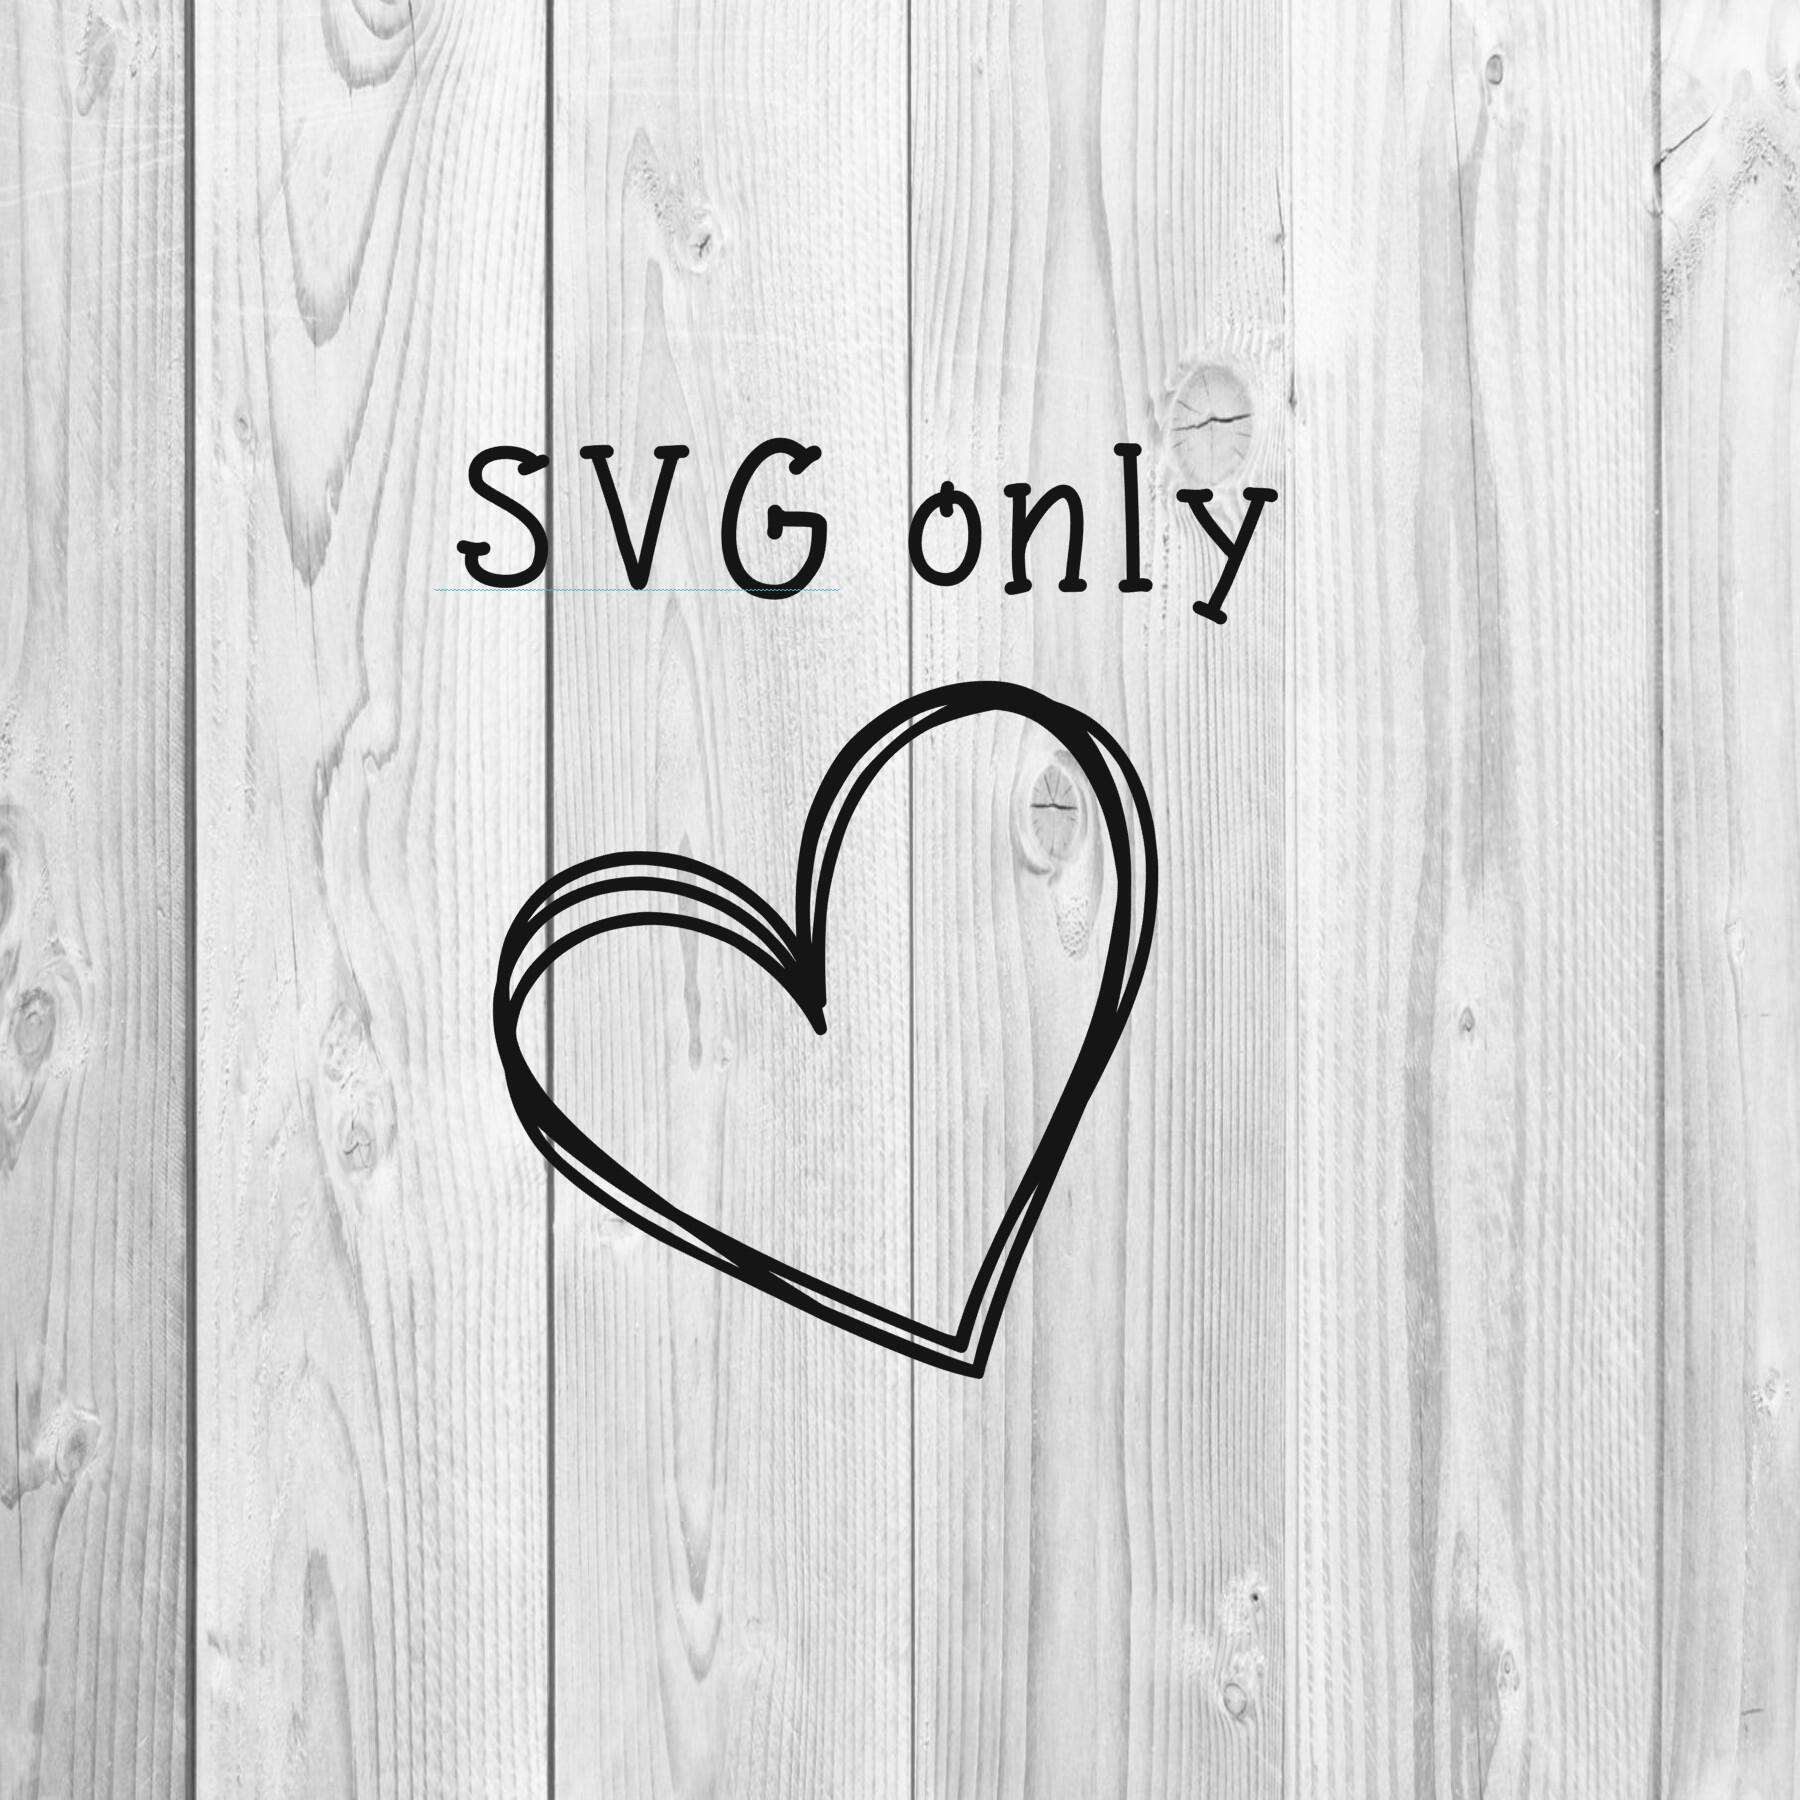 Download Art Collectibles Heart Svg Love Svg Valentines Day Svg Heart Hand Draw Svg Cricut Silhouette Svg Instant Download